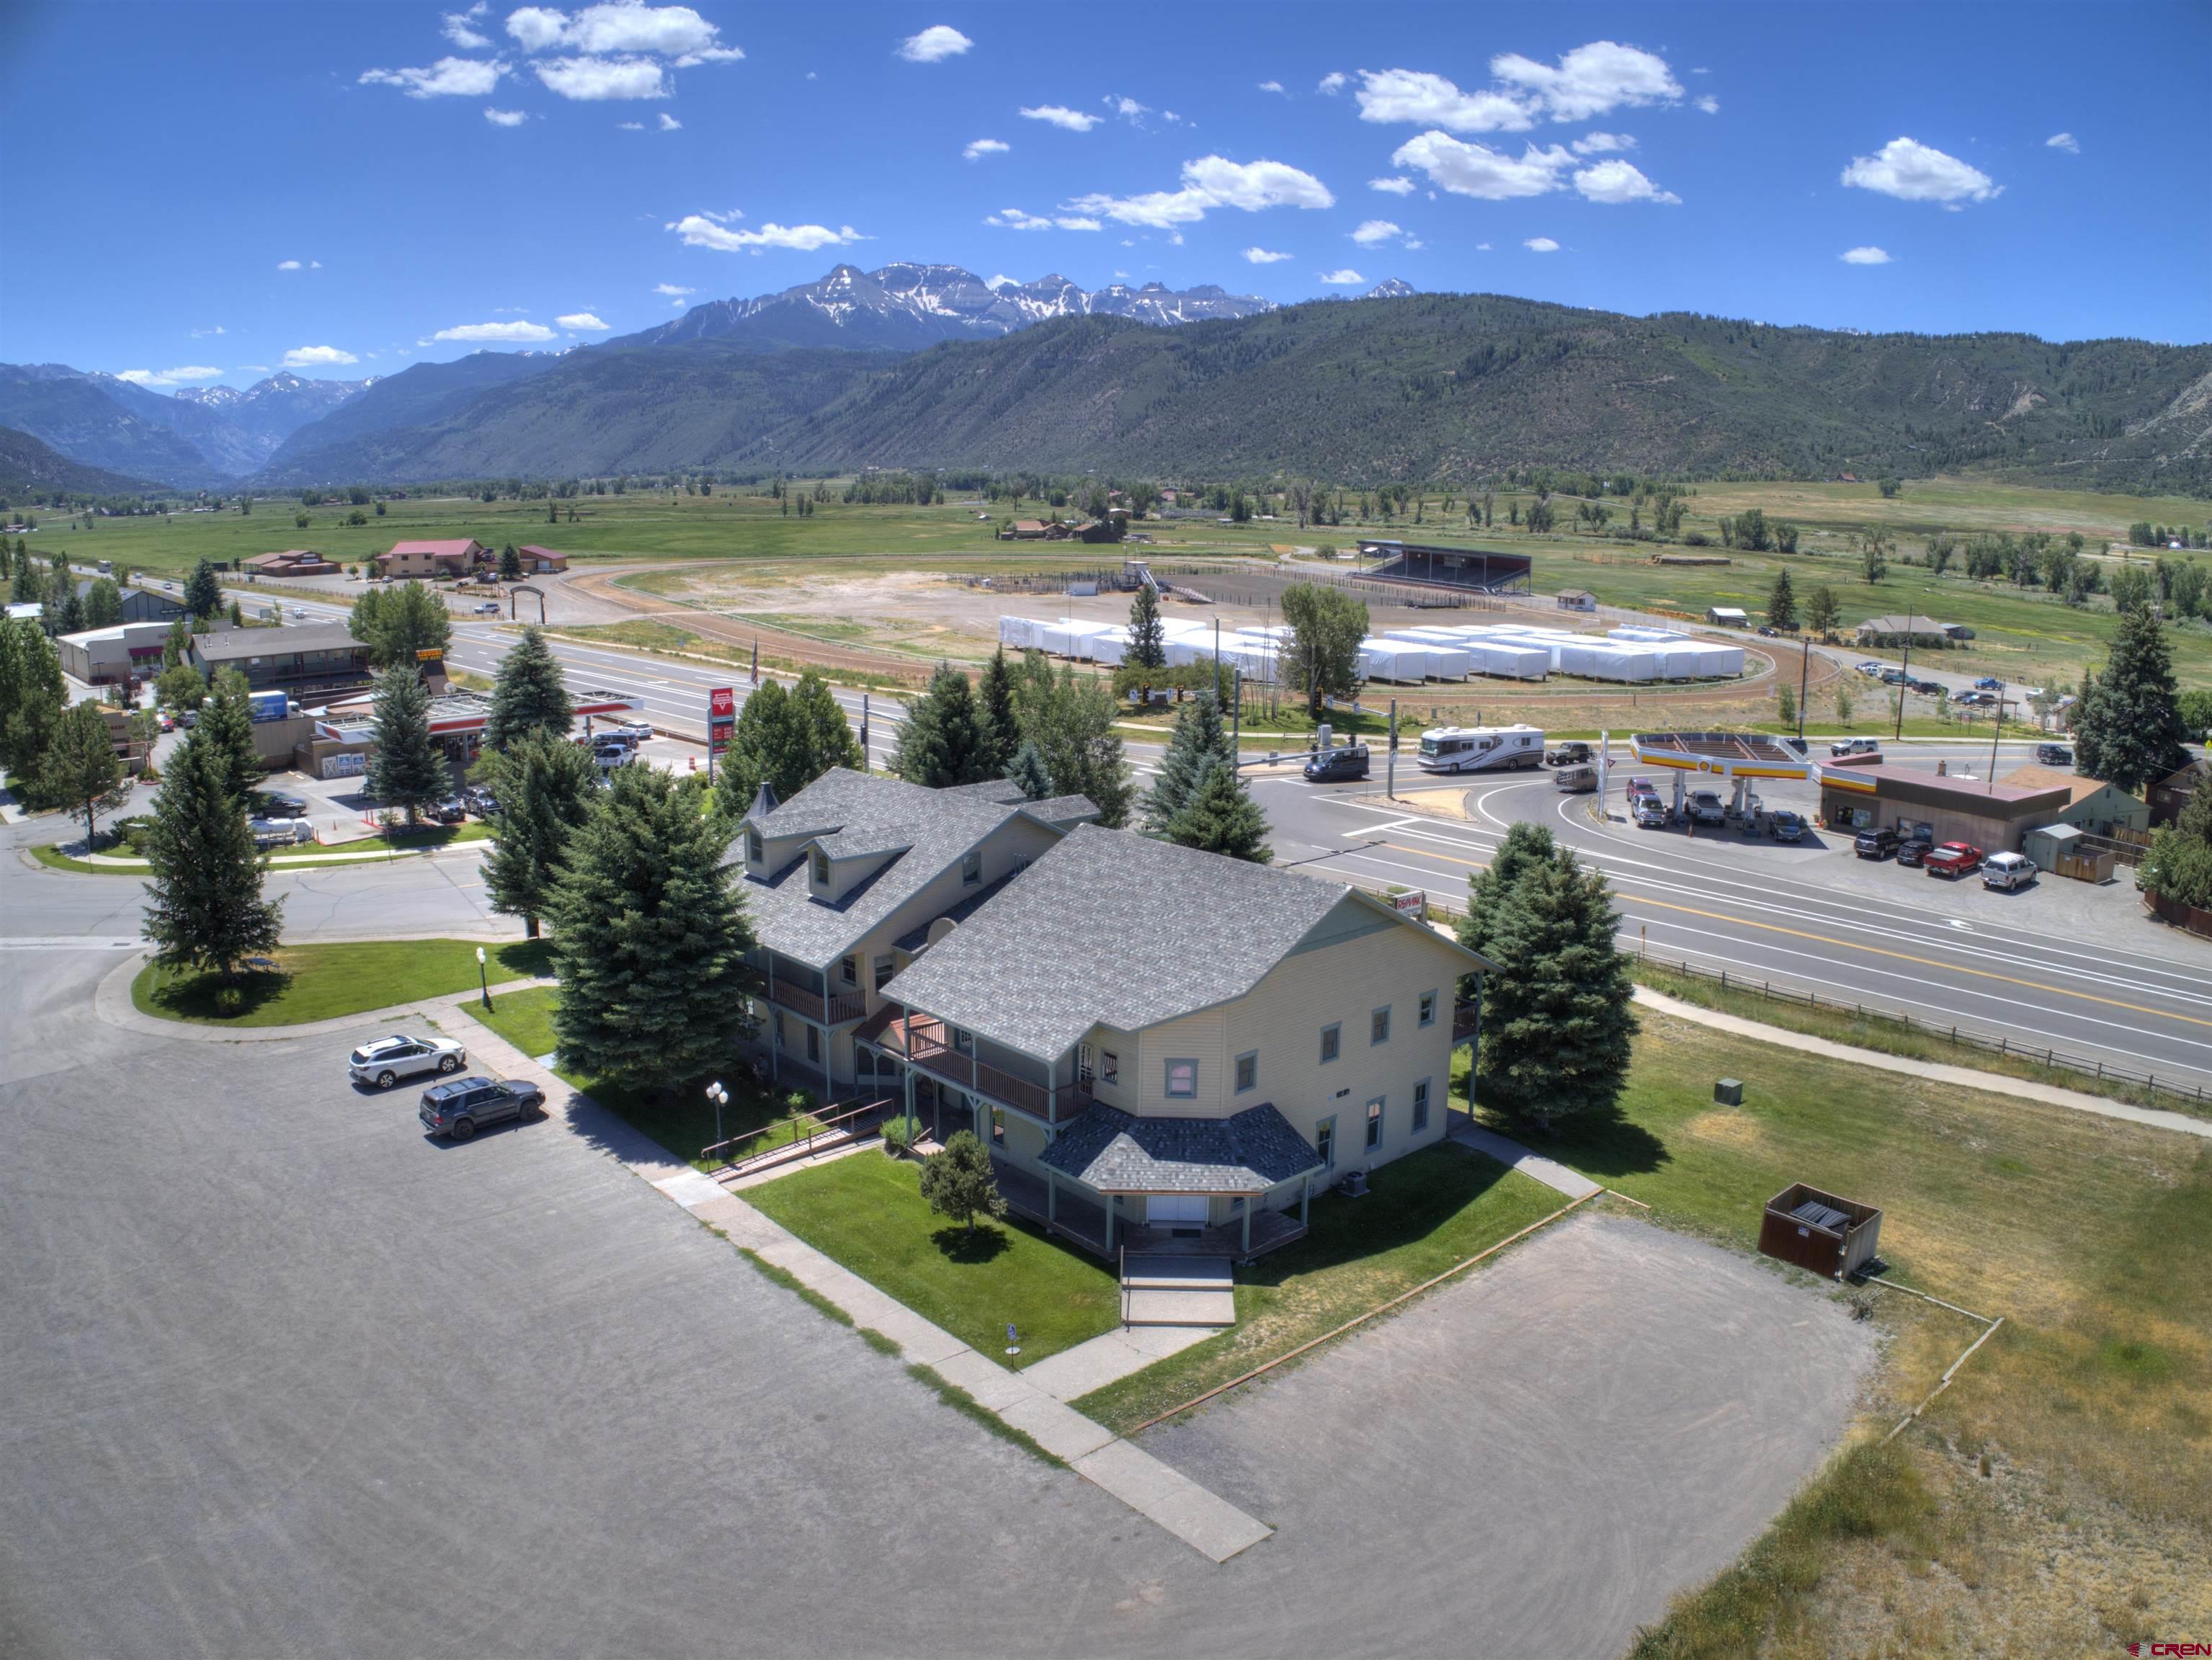 Great opportunity to own this large commercial building in beautiful Ridgway. Prime location and visibility at the intersection of Highways 550 and 62. Well maintained with roof replaced 2 years ago. Additional 8 acre parcel available for development. Building has been subdivided and various units may be sold separately.